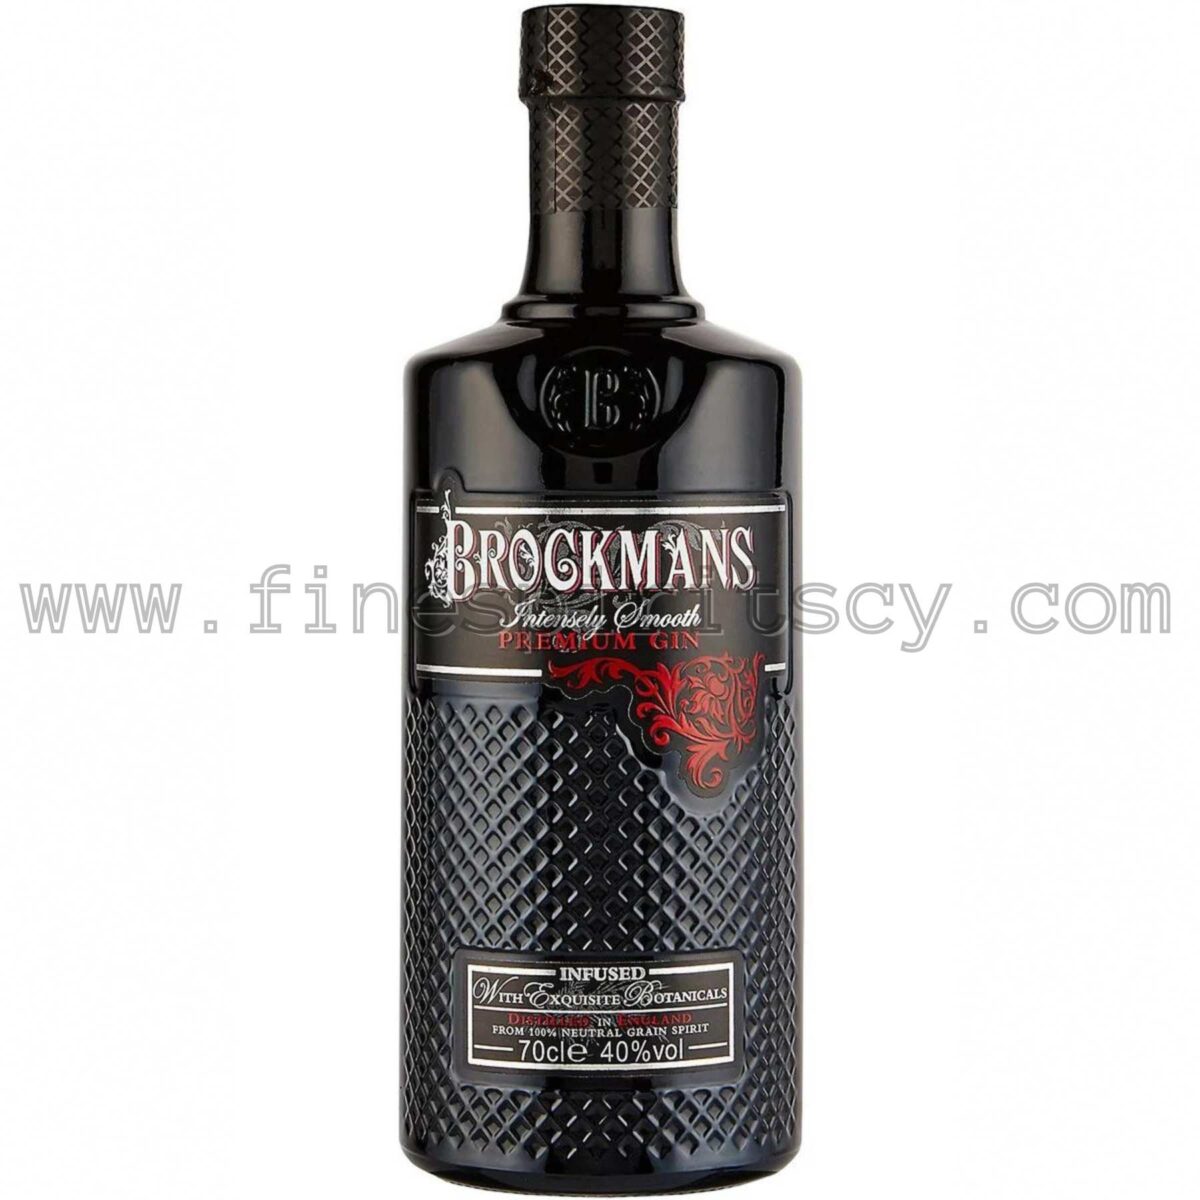 Brockmans Gin 700ml 70cl 0.7L Price Cyprus Fine Spirits CY Order Online Intensely Smooth